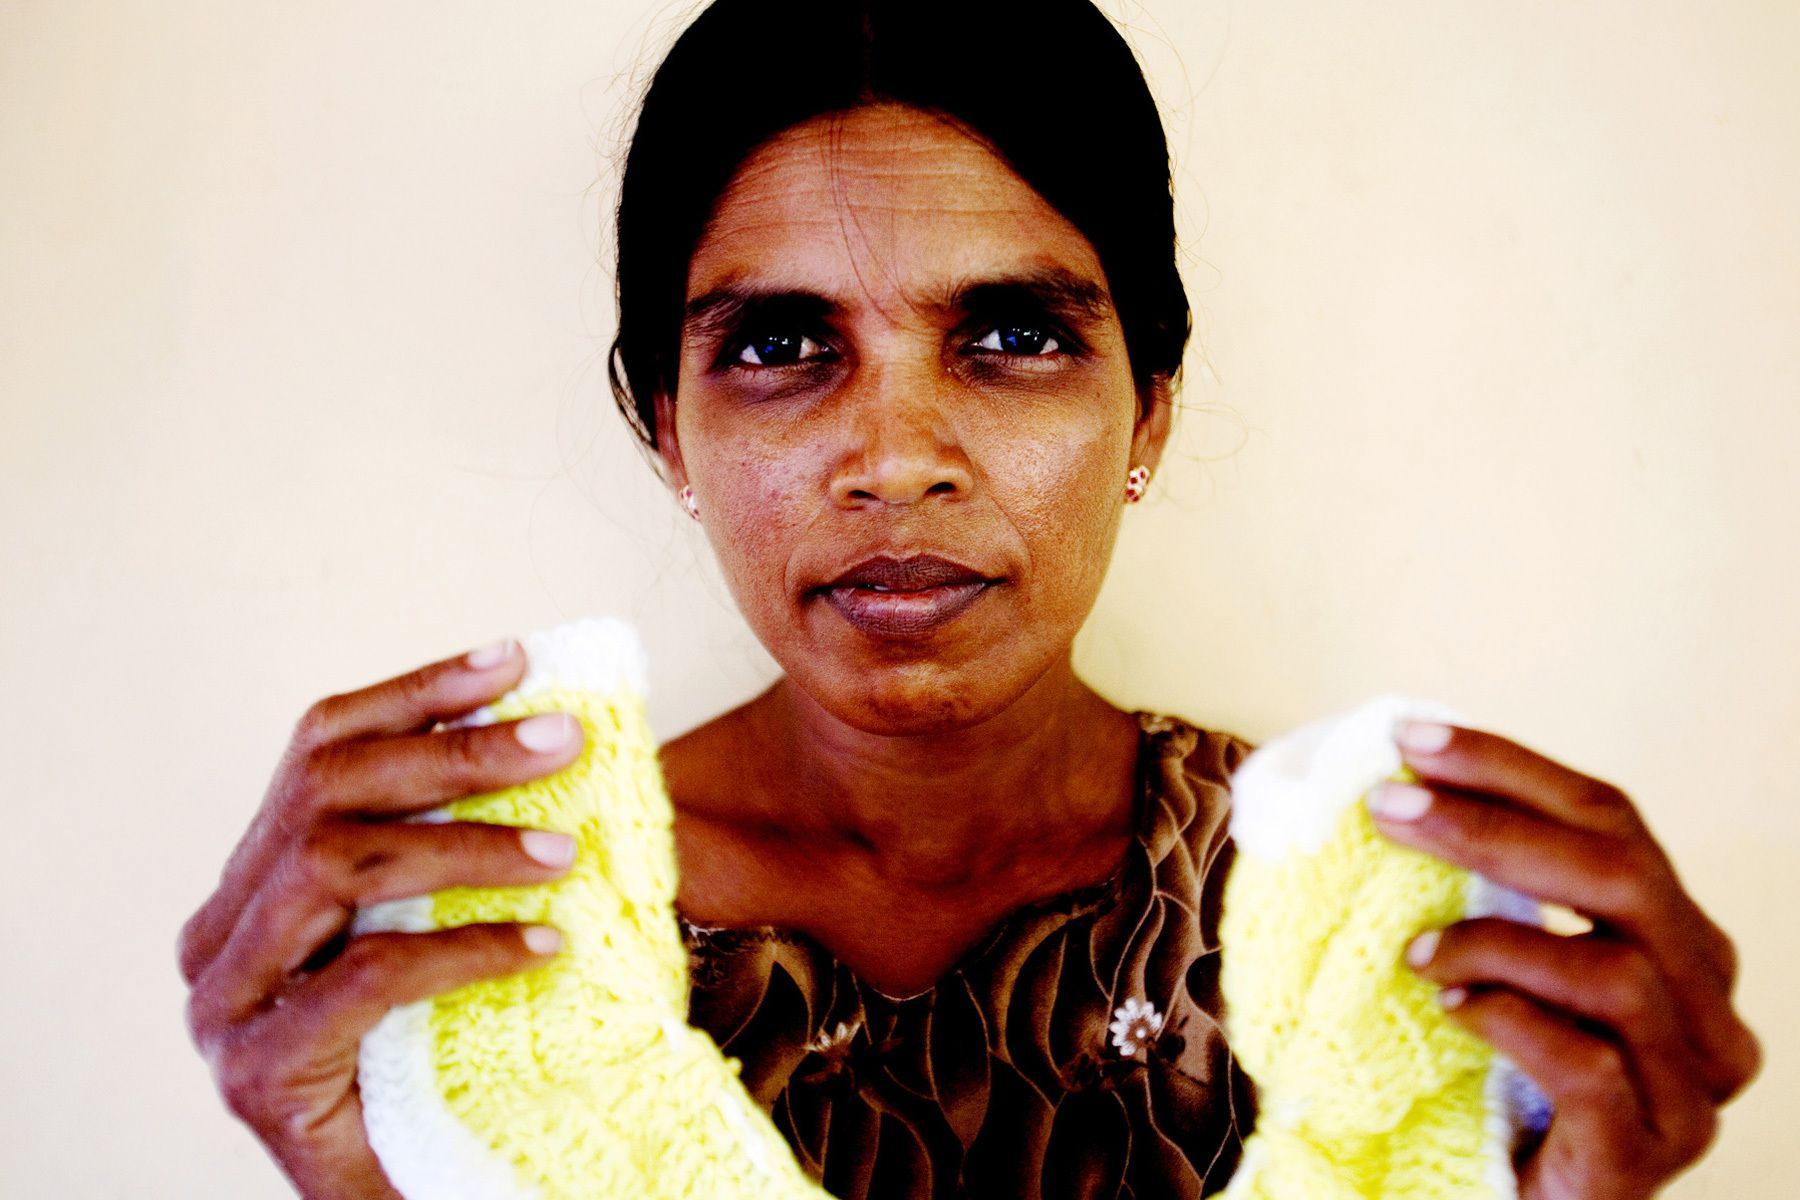 She became twenty-seven this year and has lived at the mental health care center for thirteen years.She is learning to crochet and sells the goods to a shop to earn a little money. 